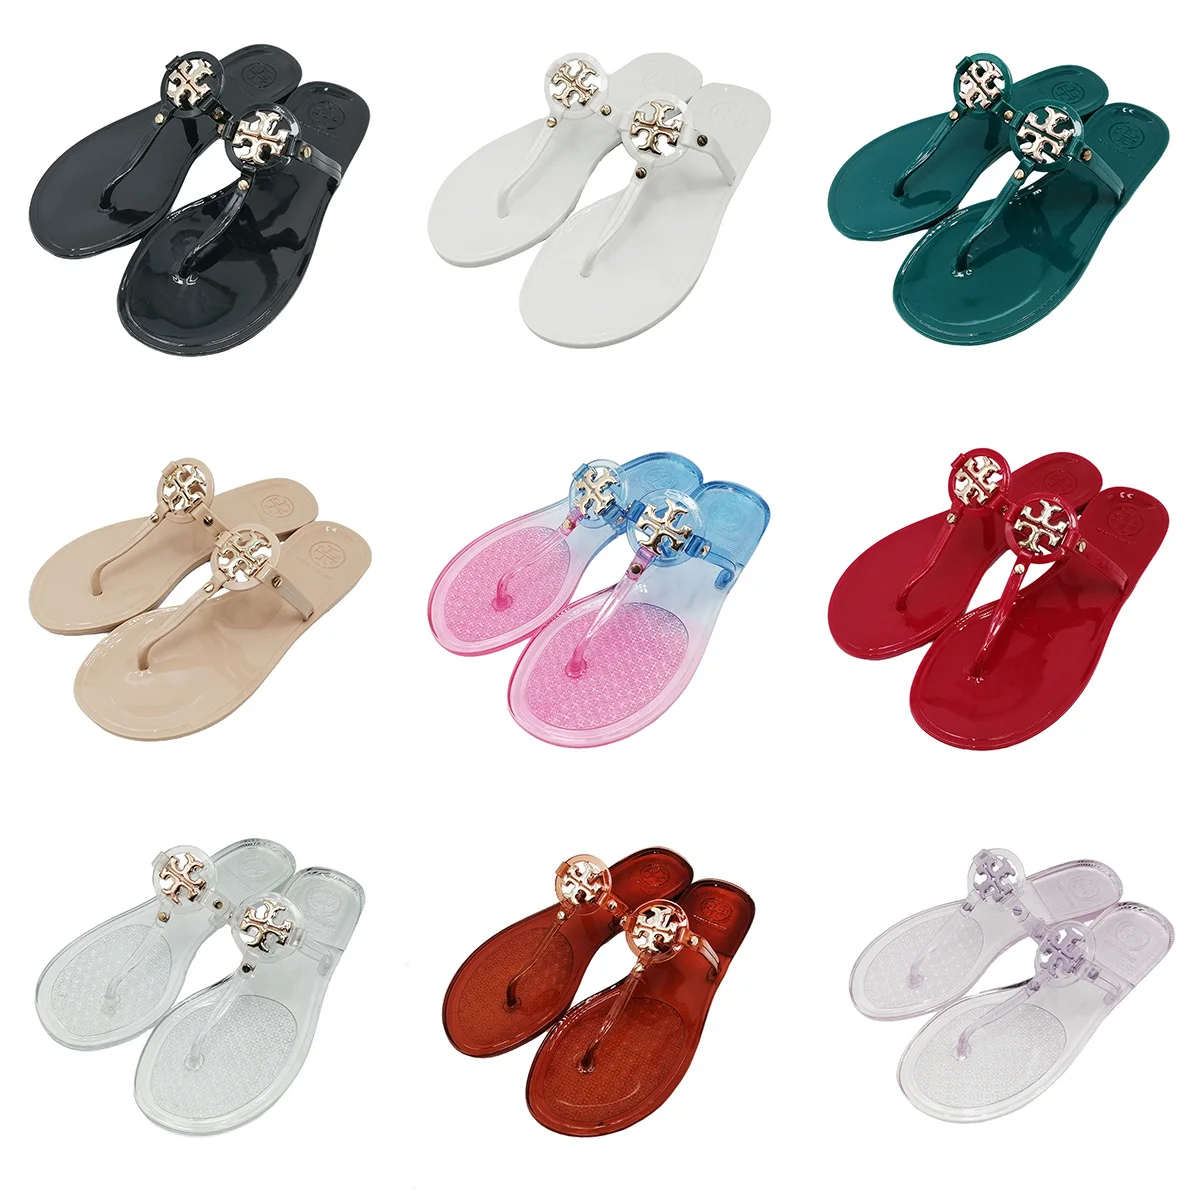 Wholesale Fashion solid color designer sandals flip flops casual home slippers  women's sandals flat shoes RCC TT Famous brand in shoes From m.